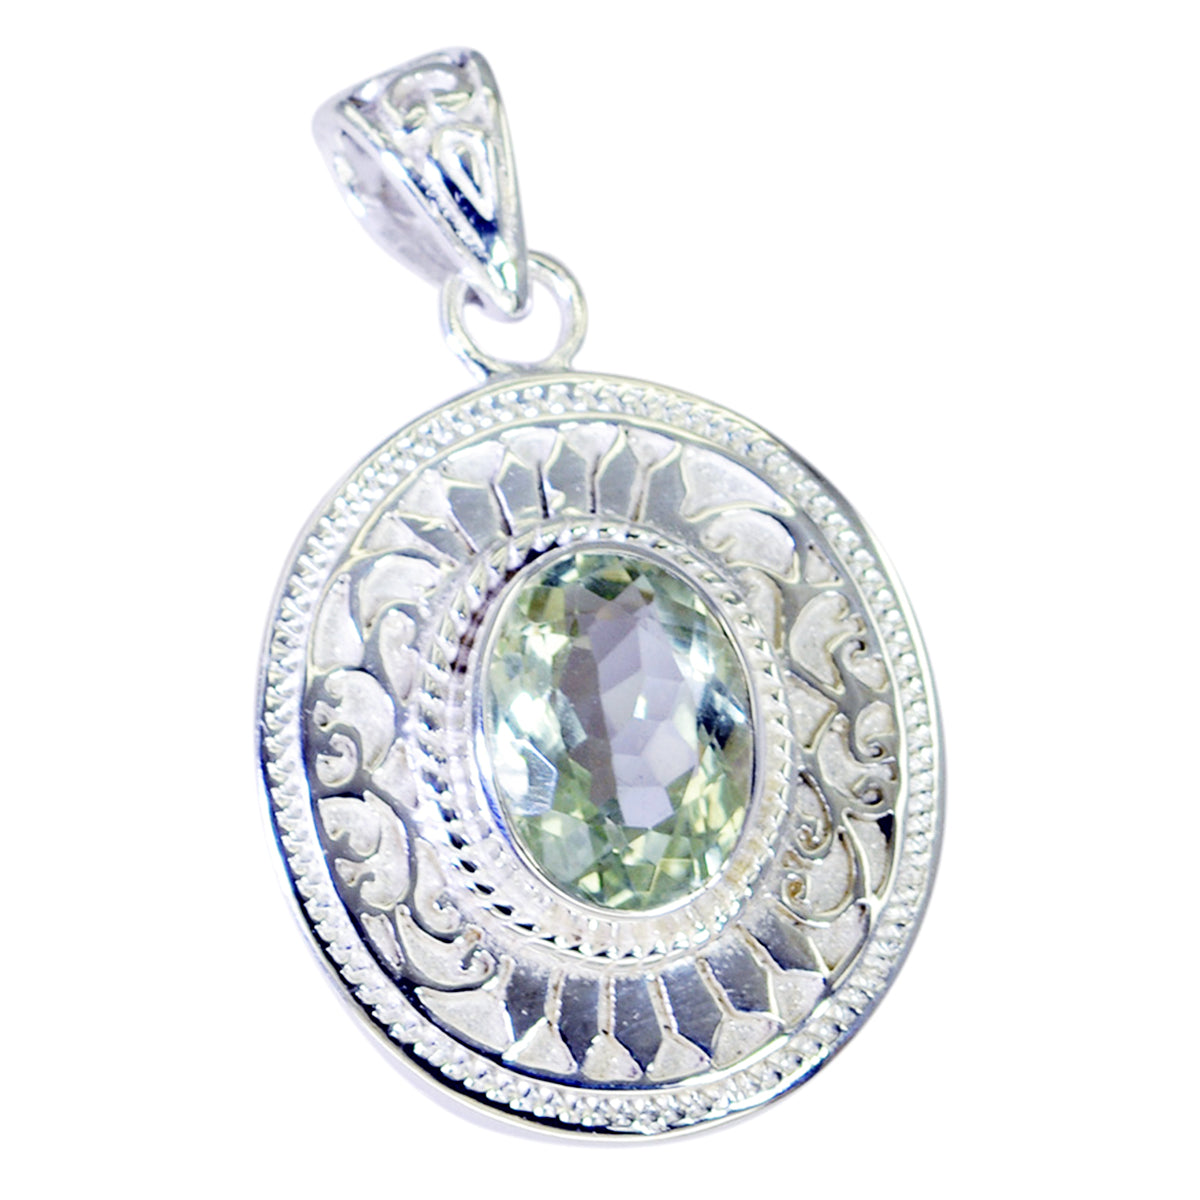 Riyo Real Gemstones Oval Faceted Green Green Amethyst Sterling Silver Pendants Faishonable day gift